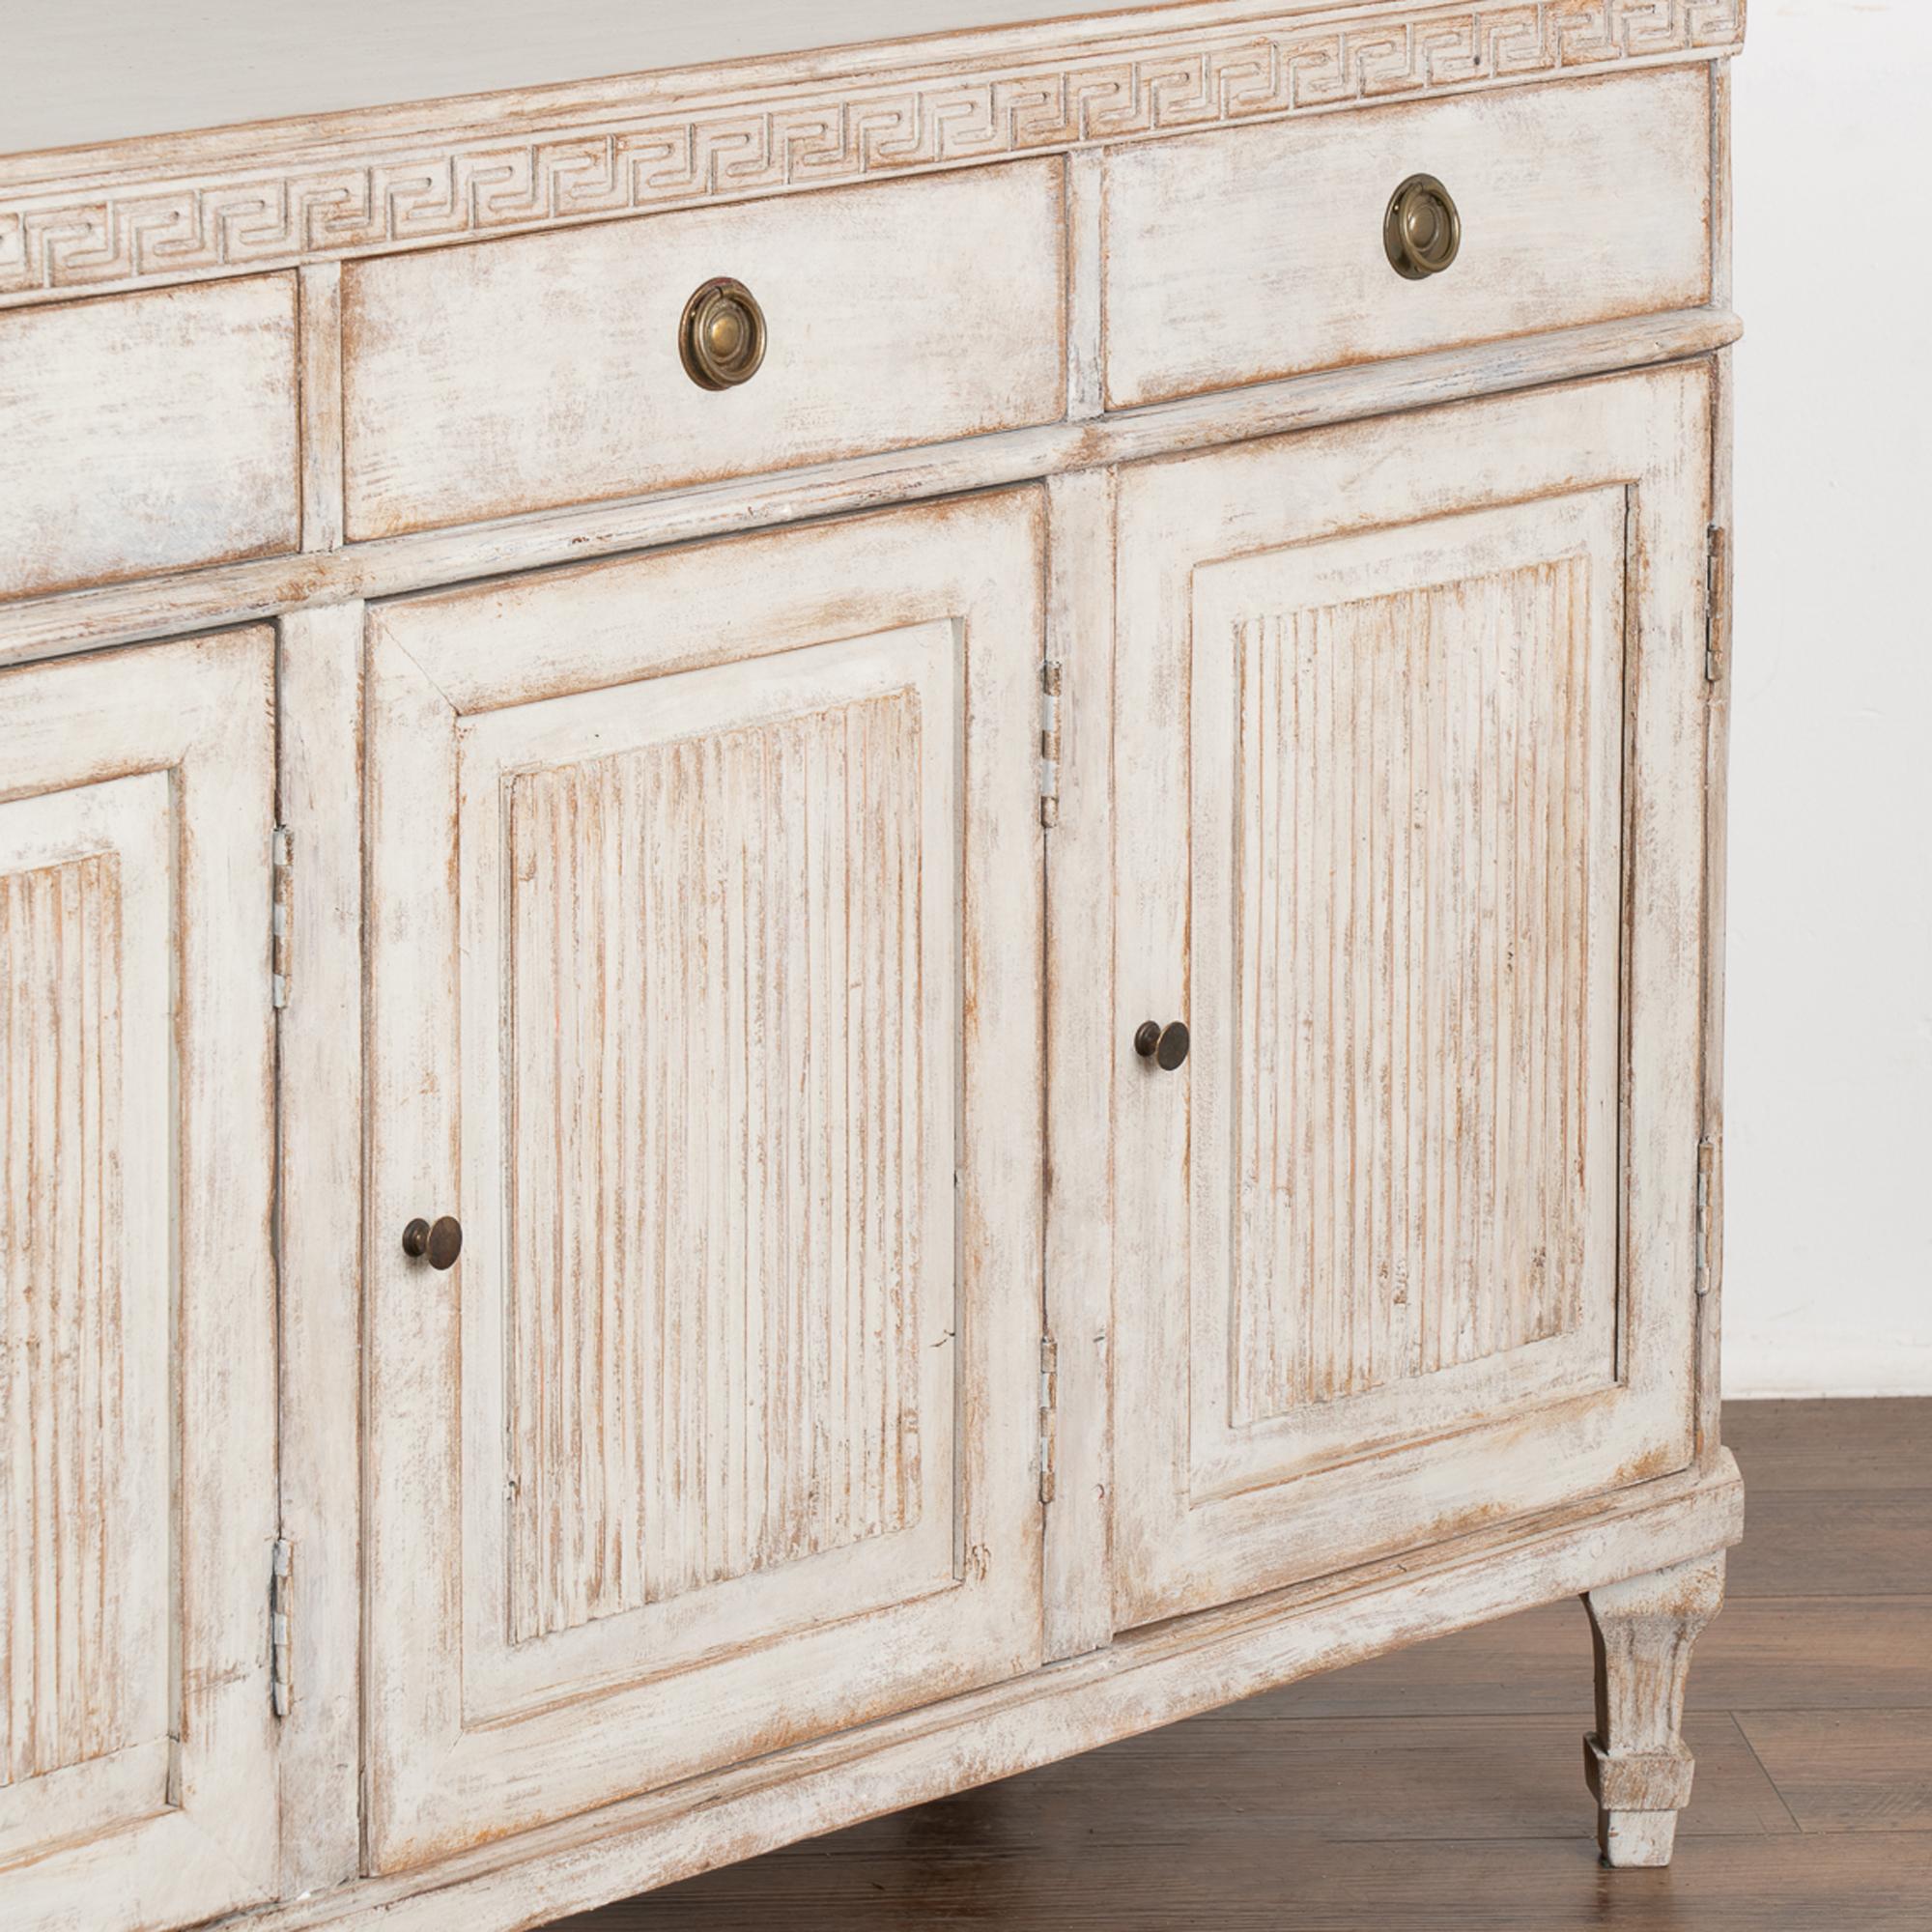 Swedish Gustavian Small White Sideboard or Console, circa 1840-60 For Sale 3